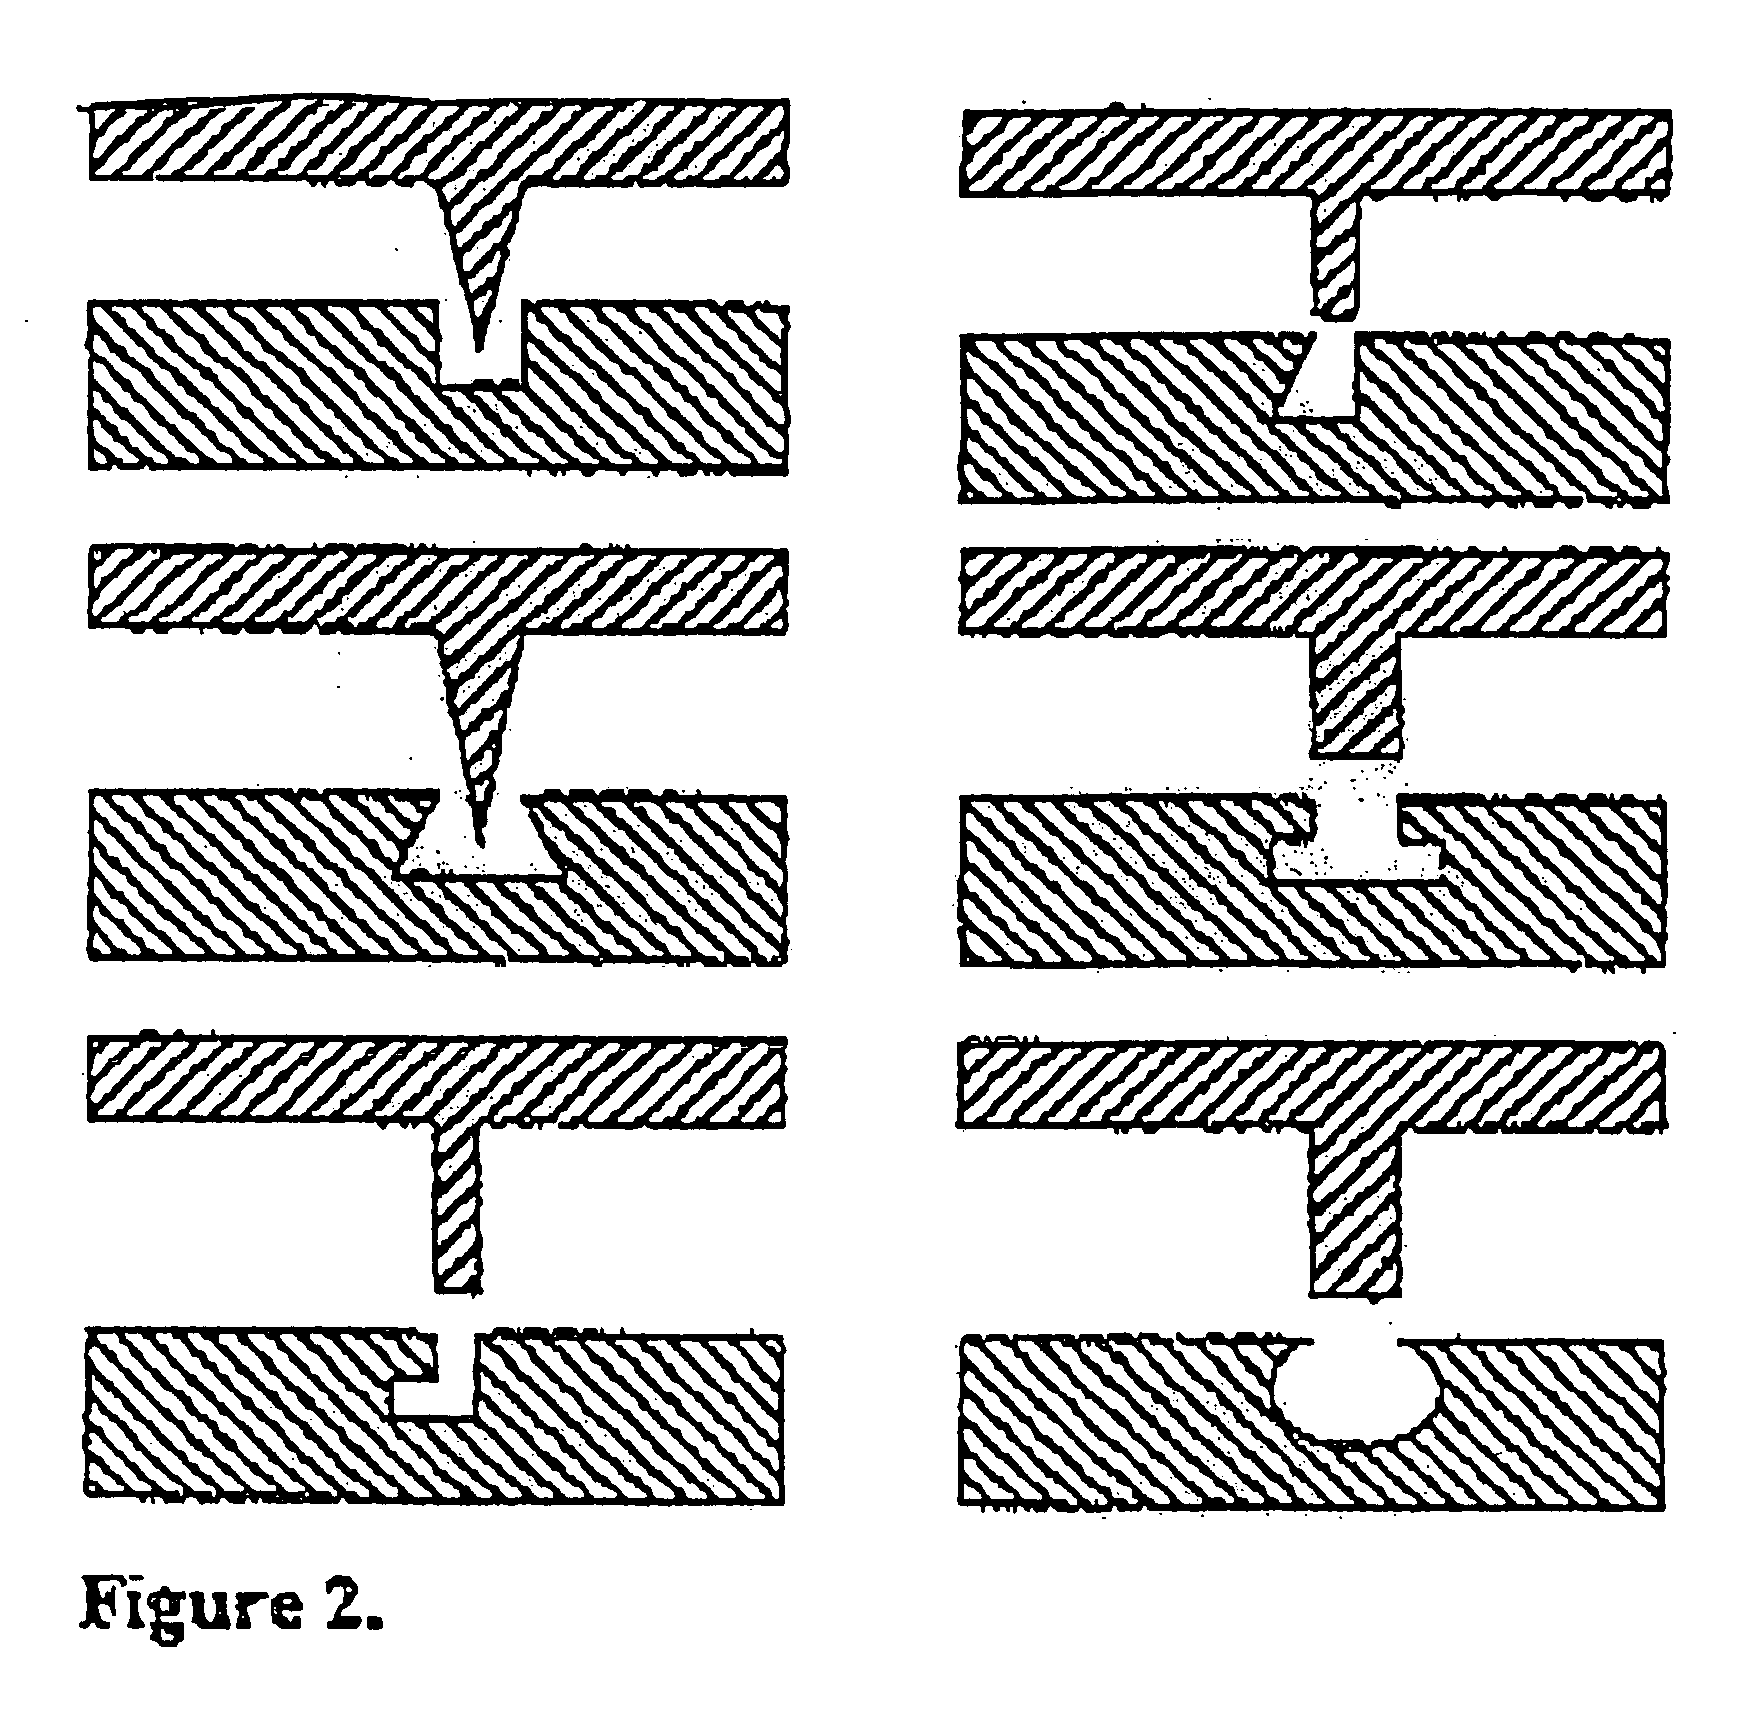 Method of forming a sputtering target assembly and assembly made therefrom